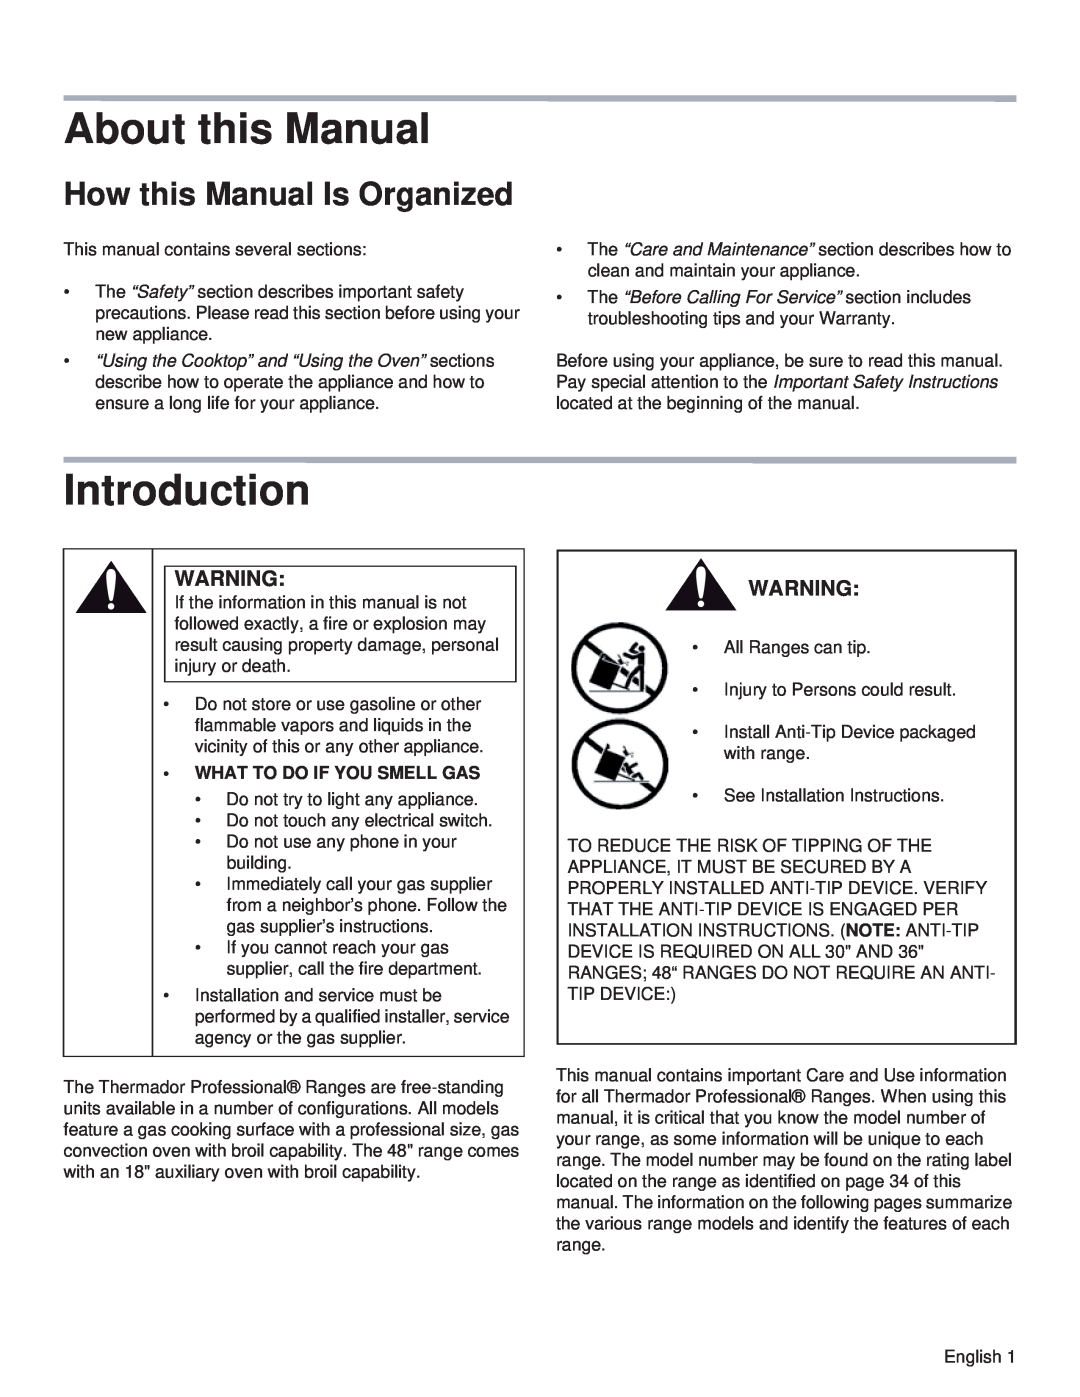 Thermador PRL30, PRL36, PRG48, PRG30, PRG36, PRL48 manual About this Manual, Introduction, How this Manual Is Organized 